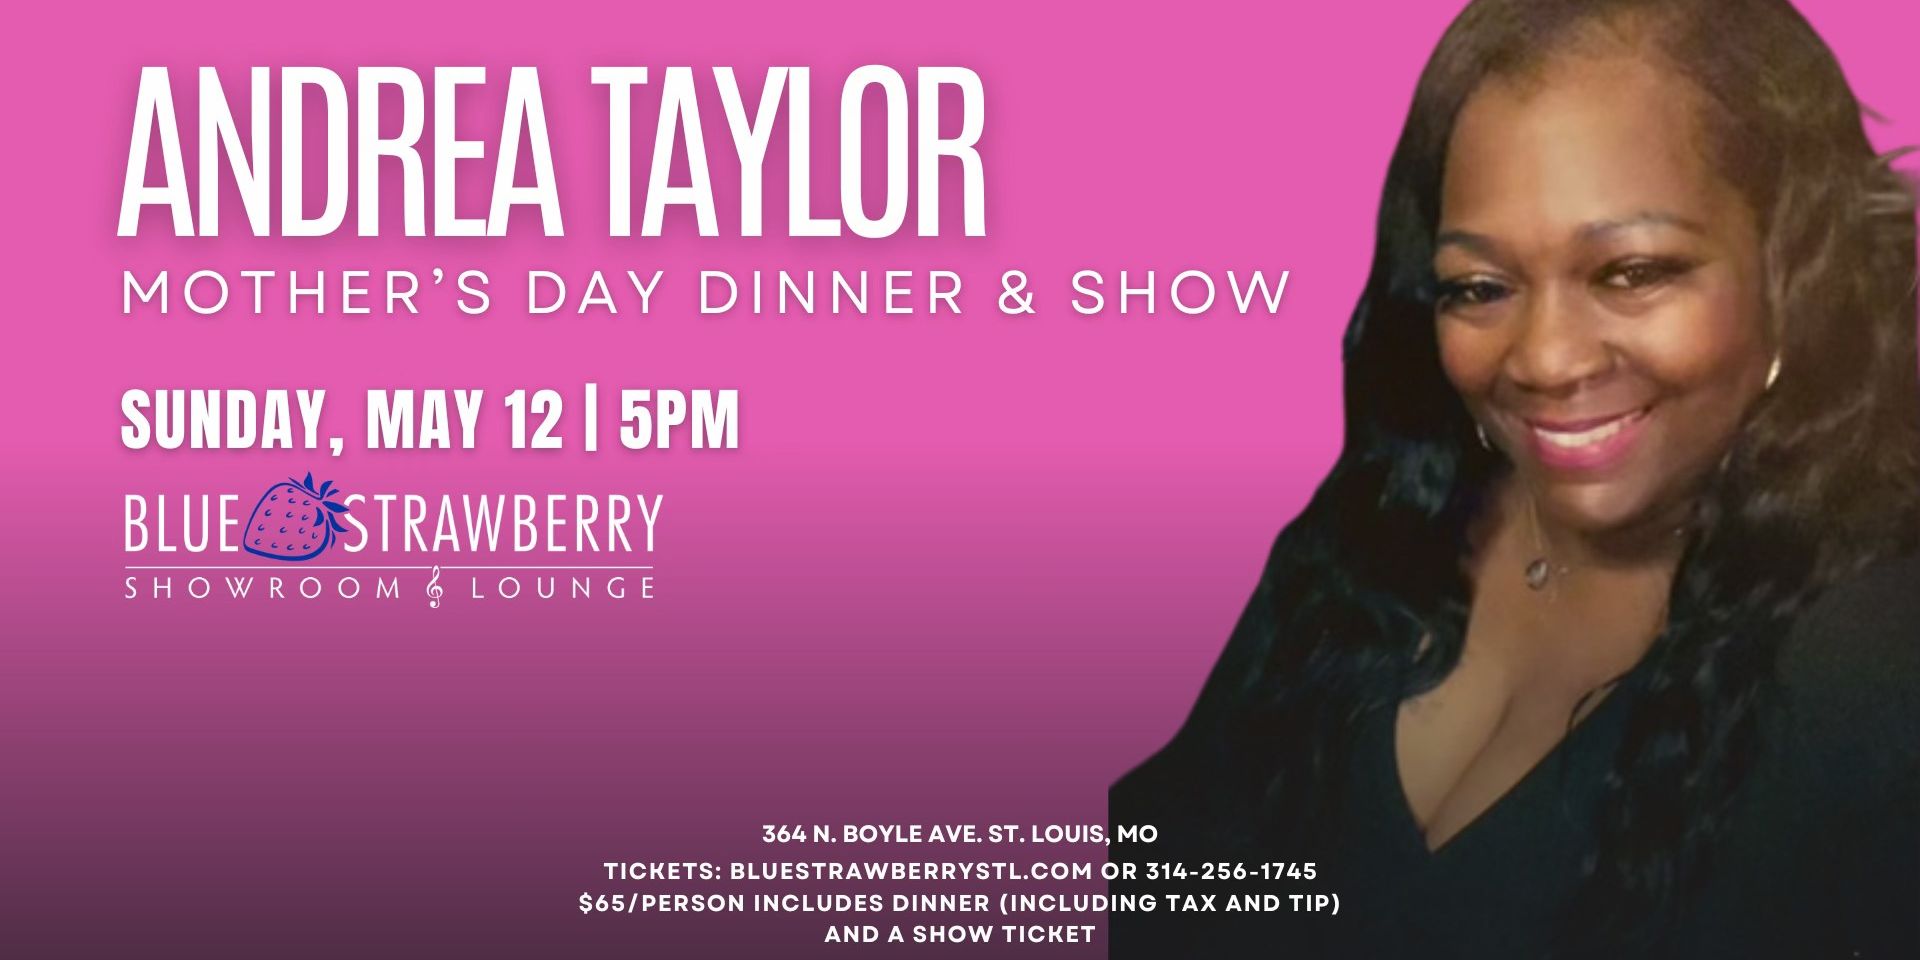 Andrea Taylor - Mother's Day Dinner & Show promotional image